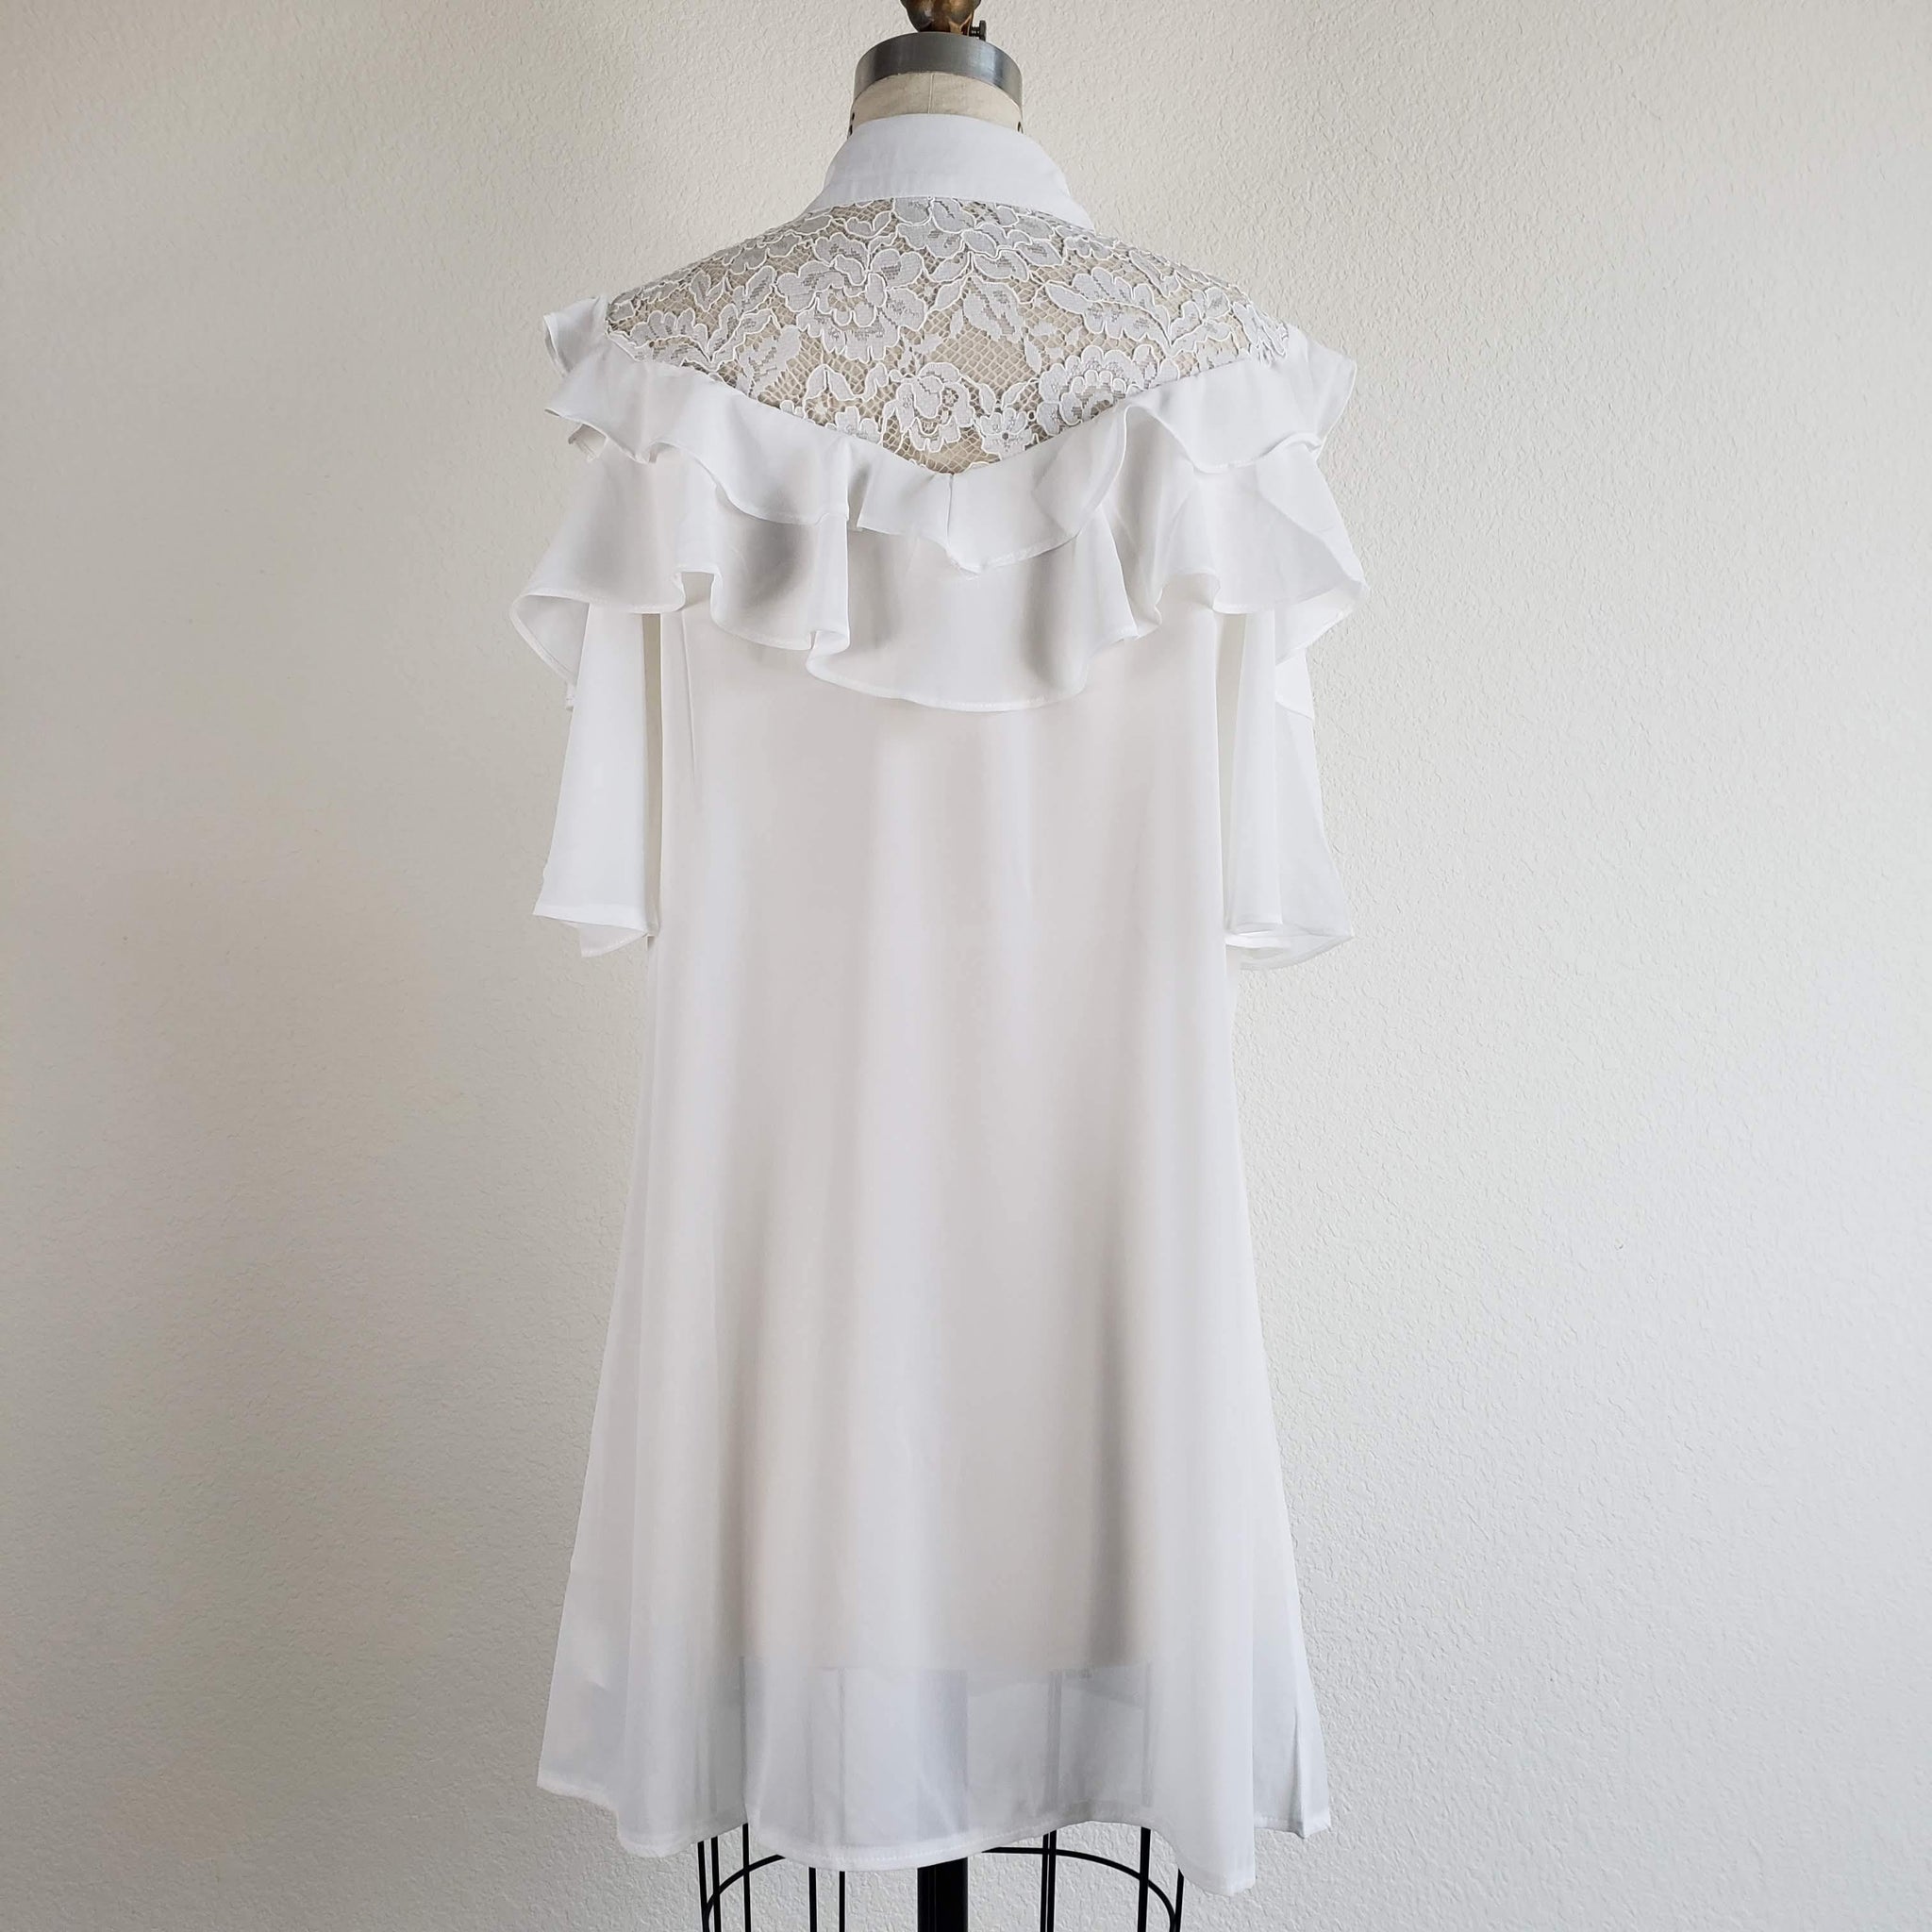 Lovely Lace Ruffle Tunic Top - ChicCityVintage